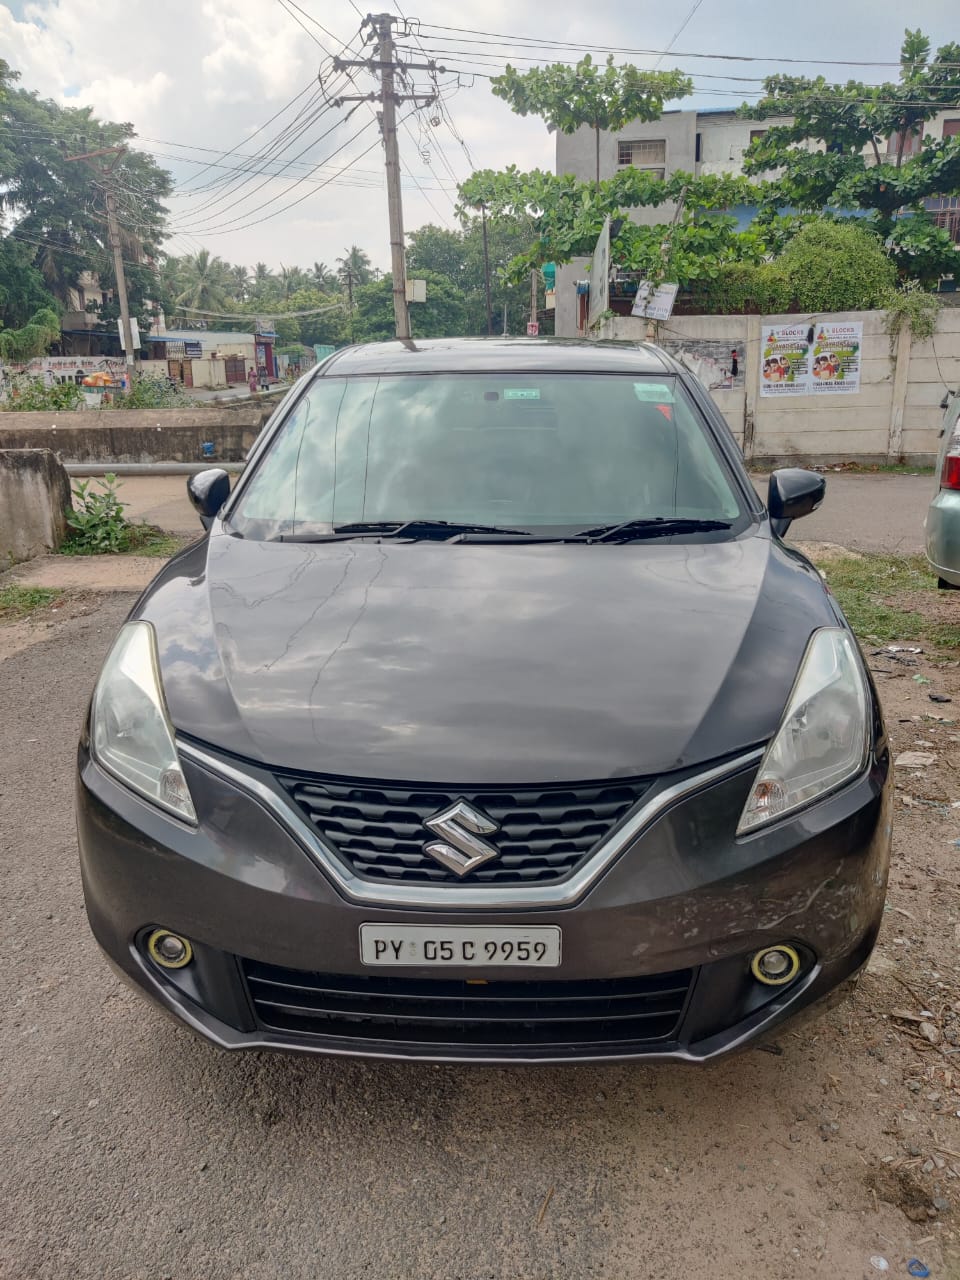 4527-for-sale-Maruthi-Suzuki-Baleno-Petrol-First-Owner-2017-PY-registered-rs-540000